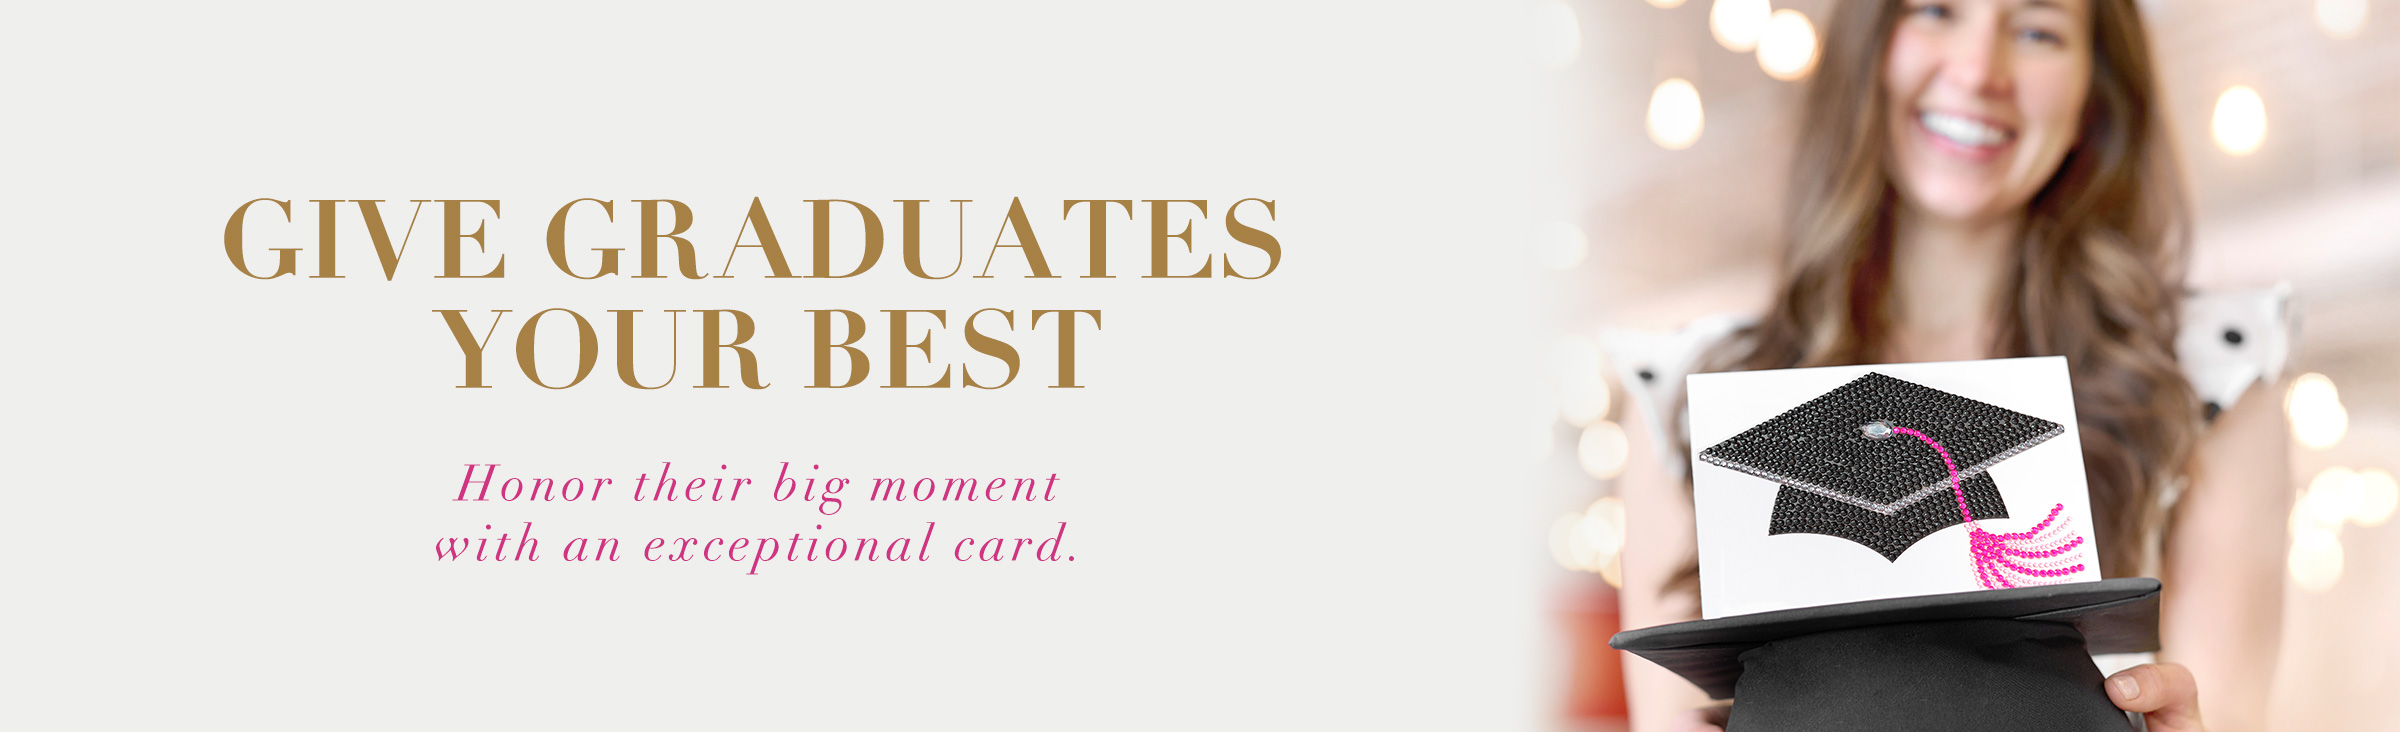 Give Graduates your best Honor their big moment with an exceptional card